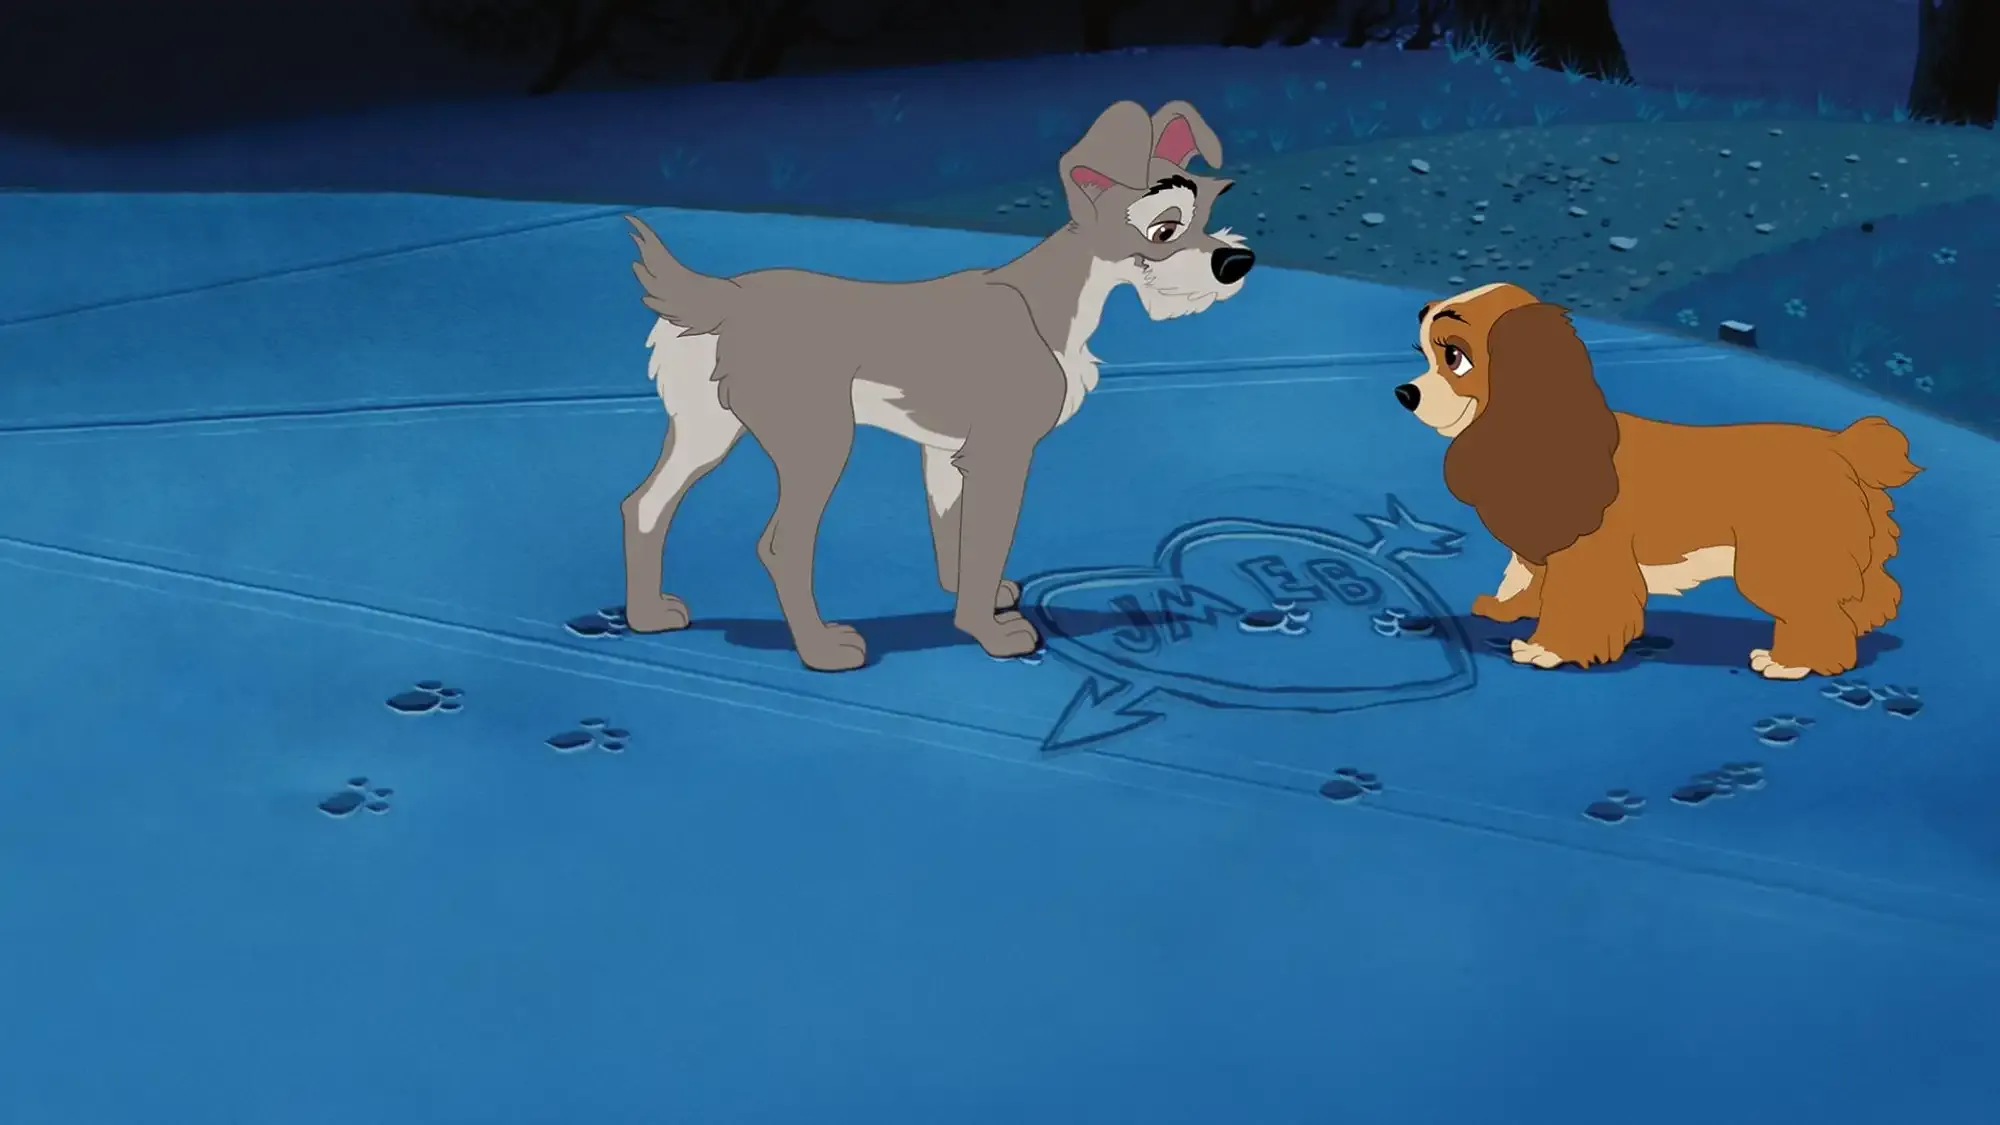 Lady and the Tramp movie review